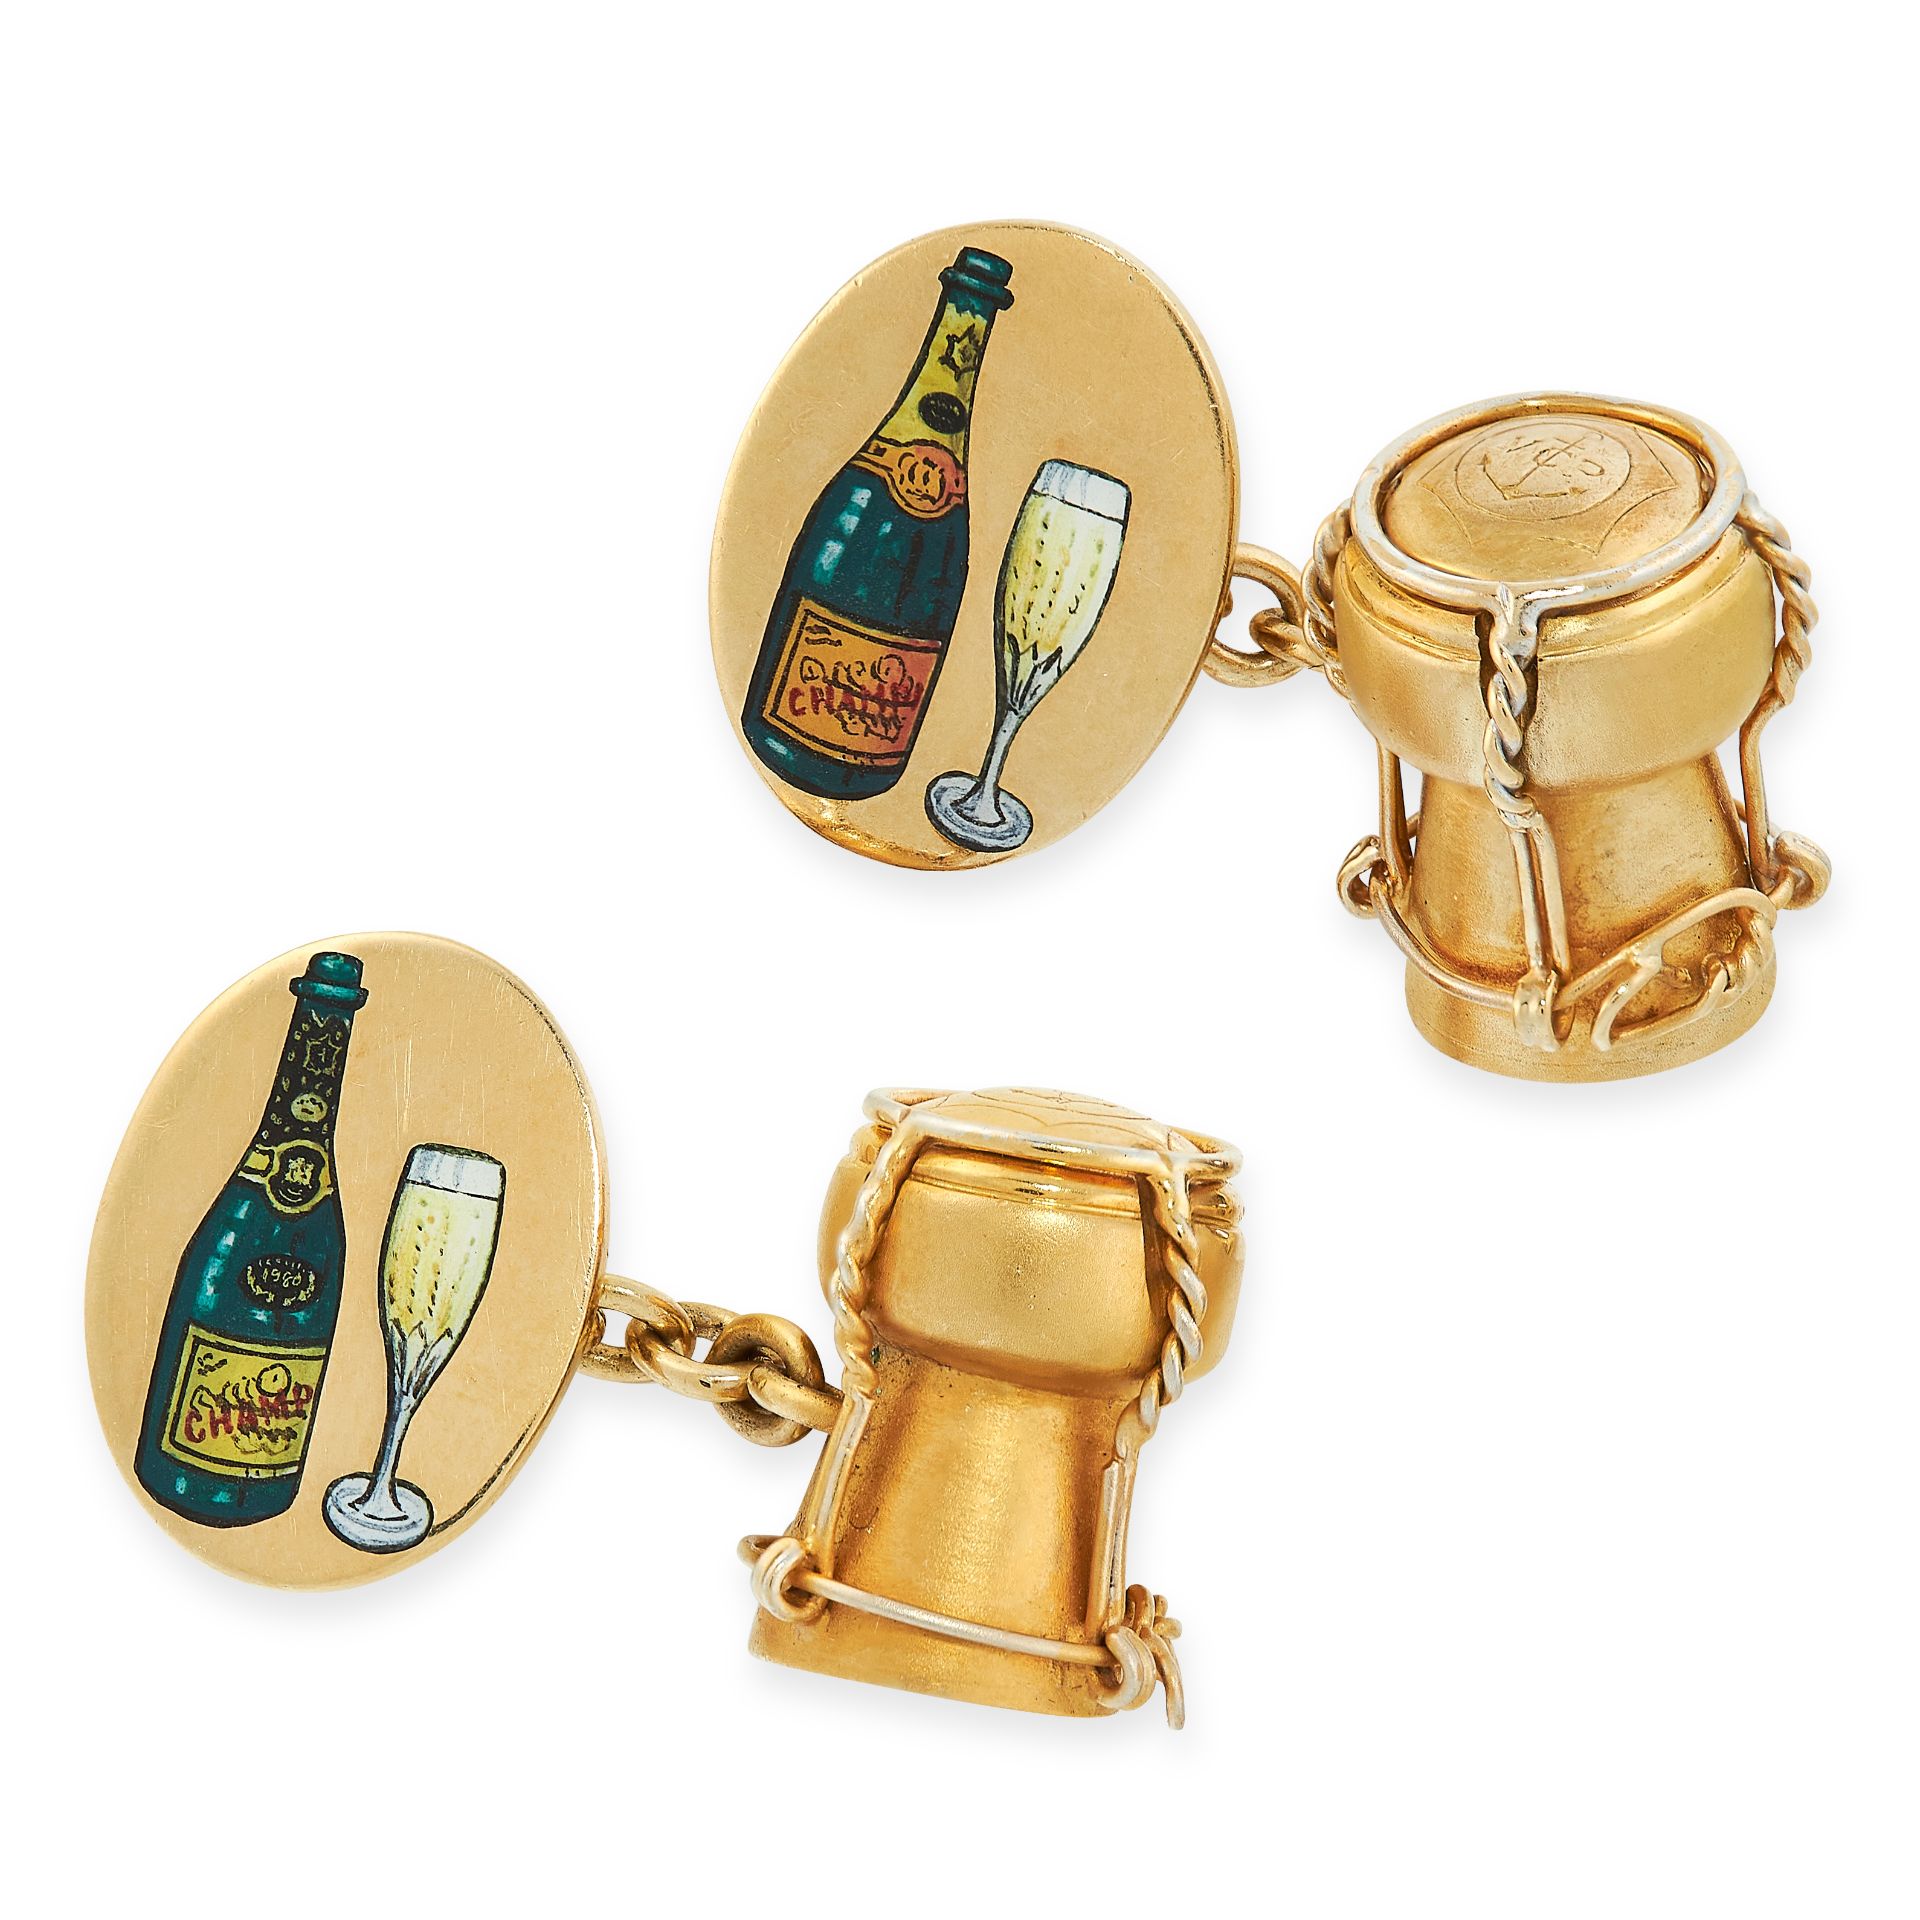 NOVELTY ENAMEL VEUVE CLICQUOT CUFFLINKS, DEAKIN & FRANCIS in 18ct yellow gold, formed of a Veuve